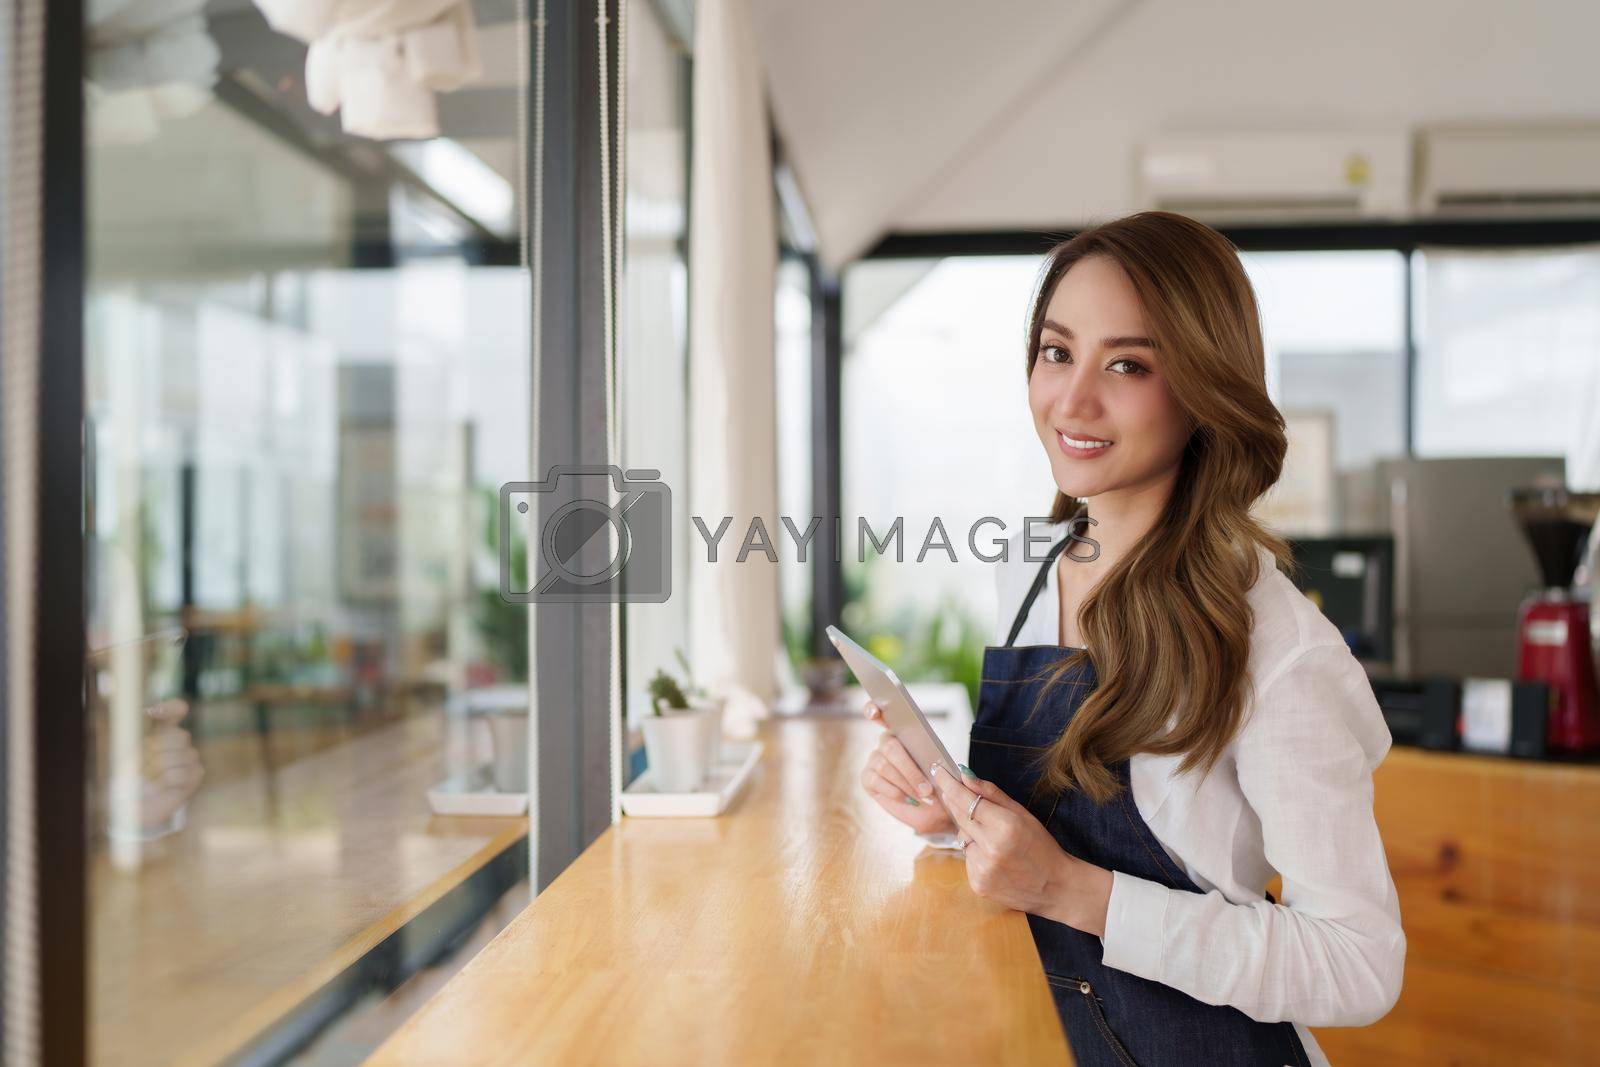 Royalty free image of Portrait of asian barista cafe owner with tablet to check order sme entrepreneur seller business concept. by itchaznong